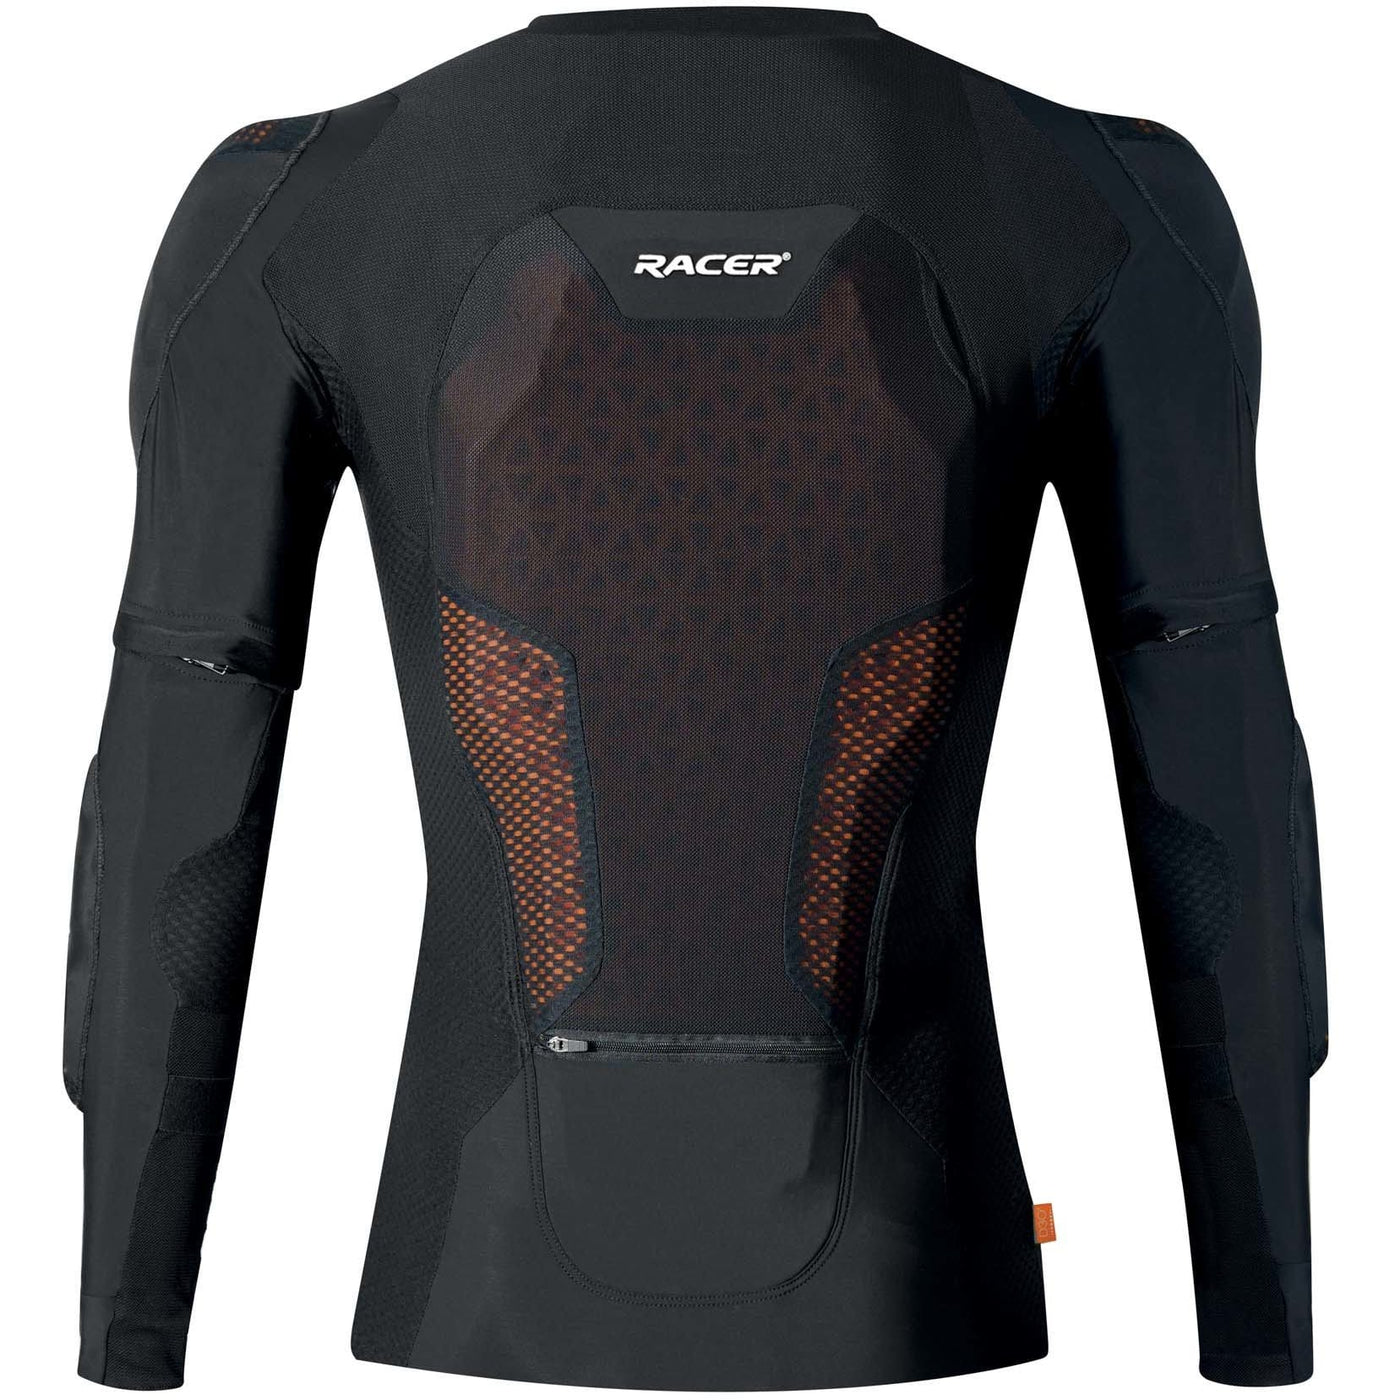 RACER France Motion Top 2 - Body Protector